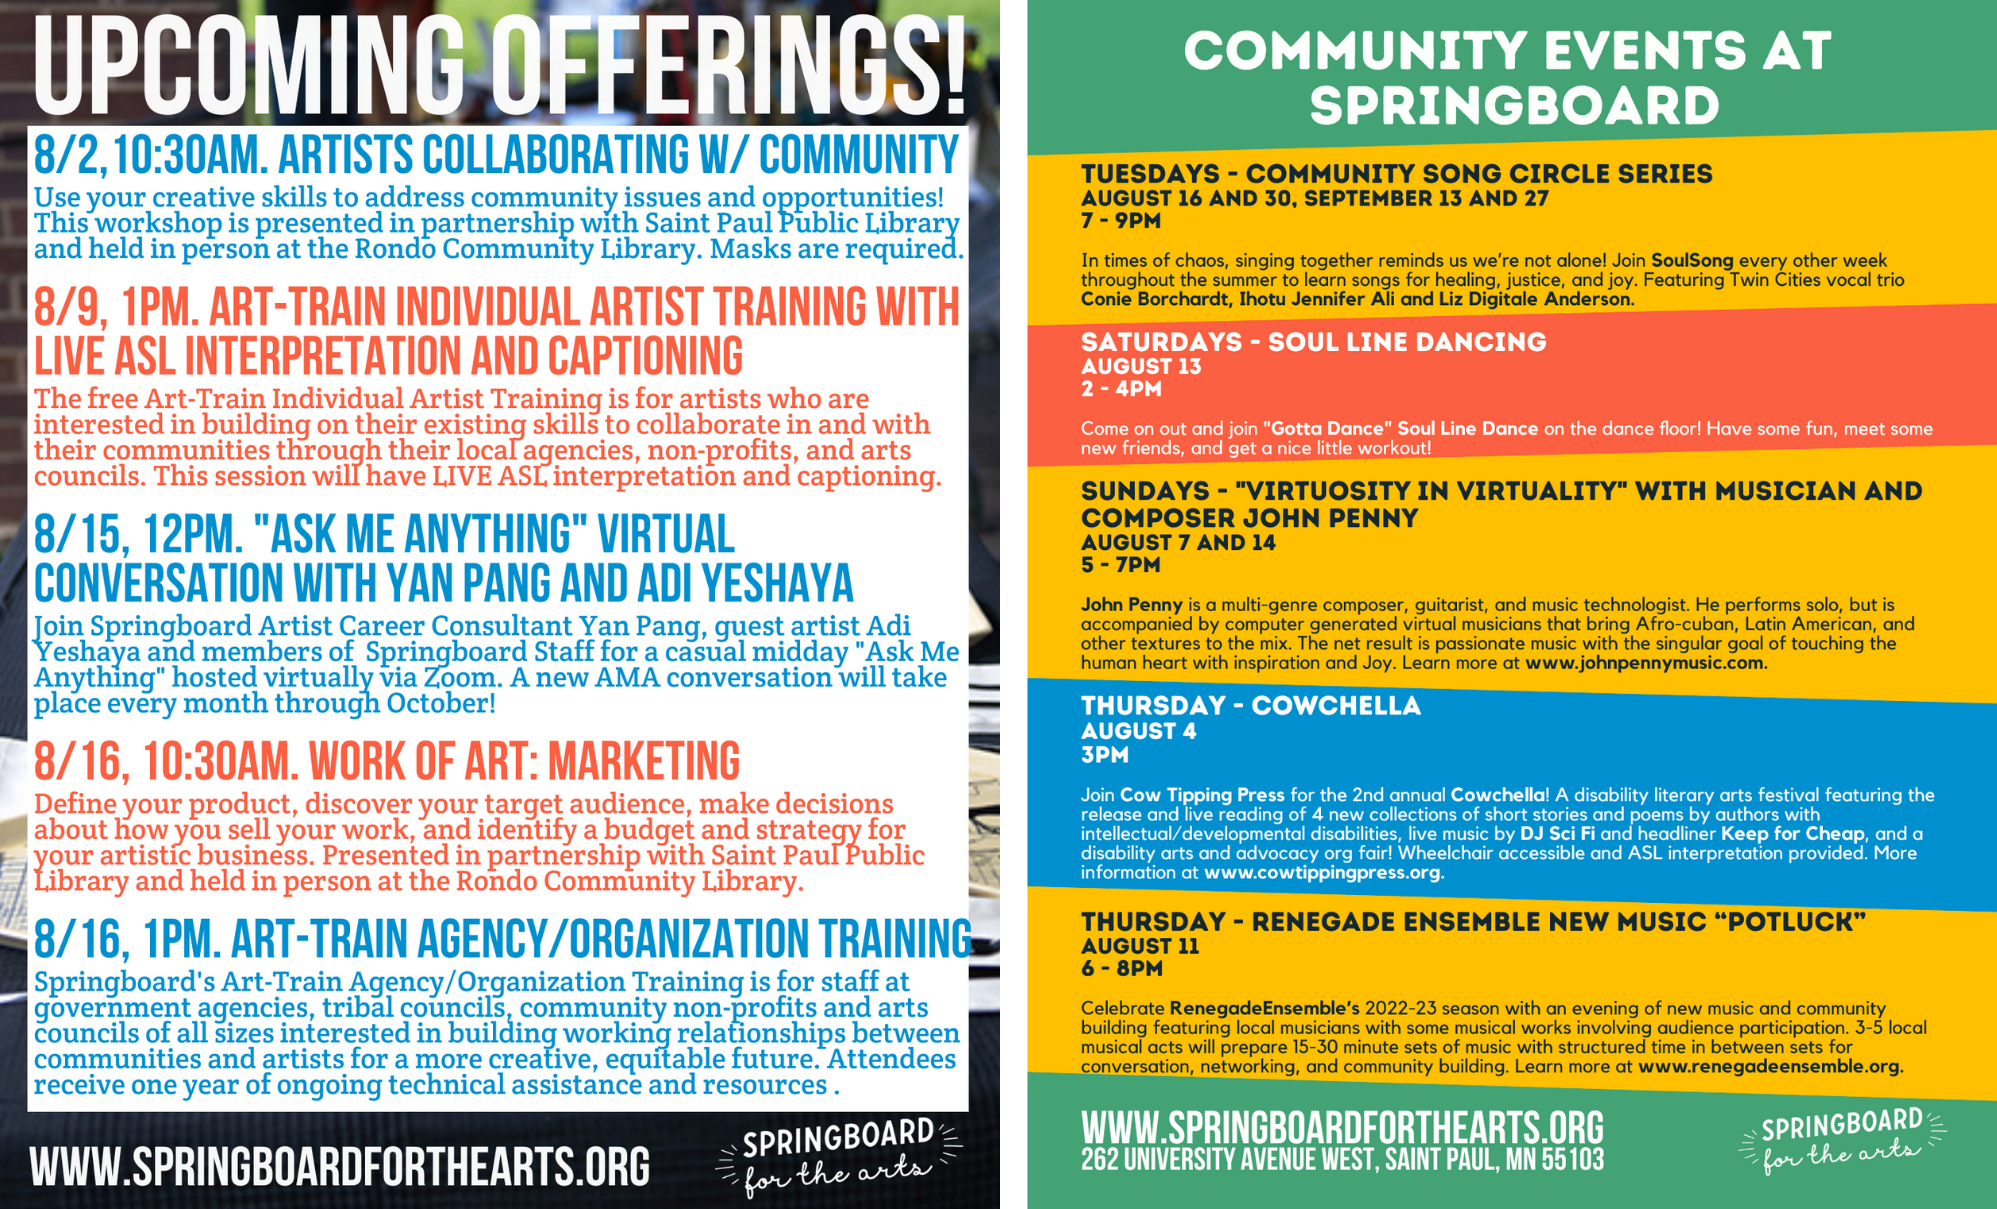 Springboard for the Arts Offerings and Events in August